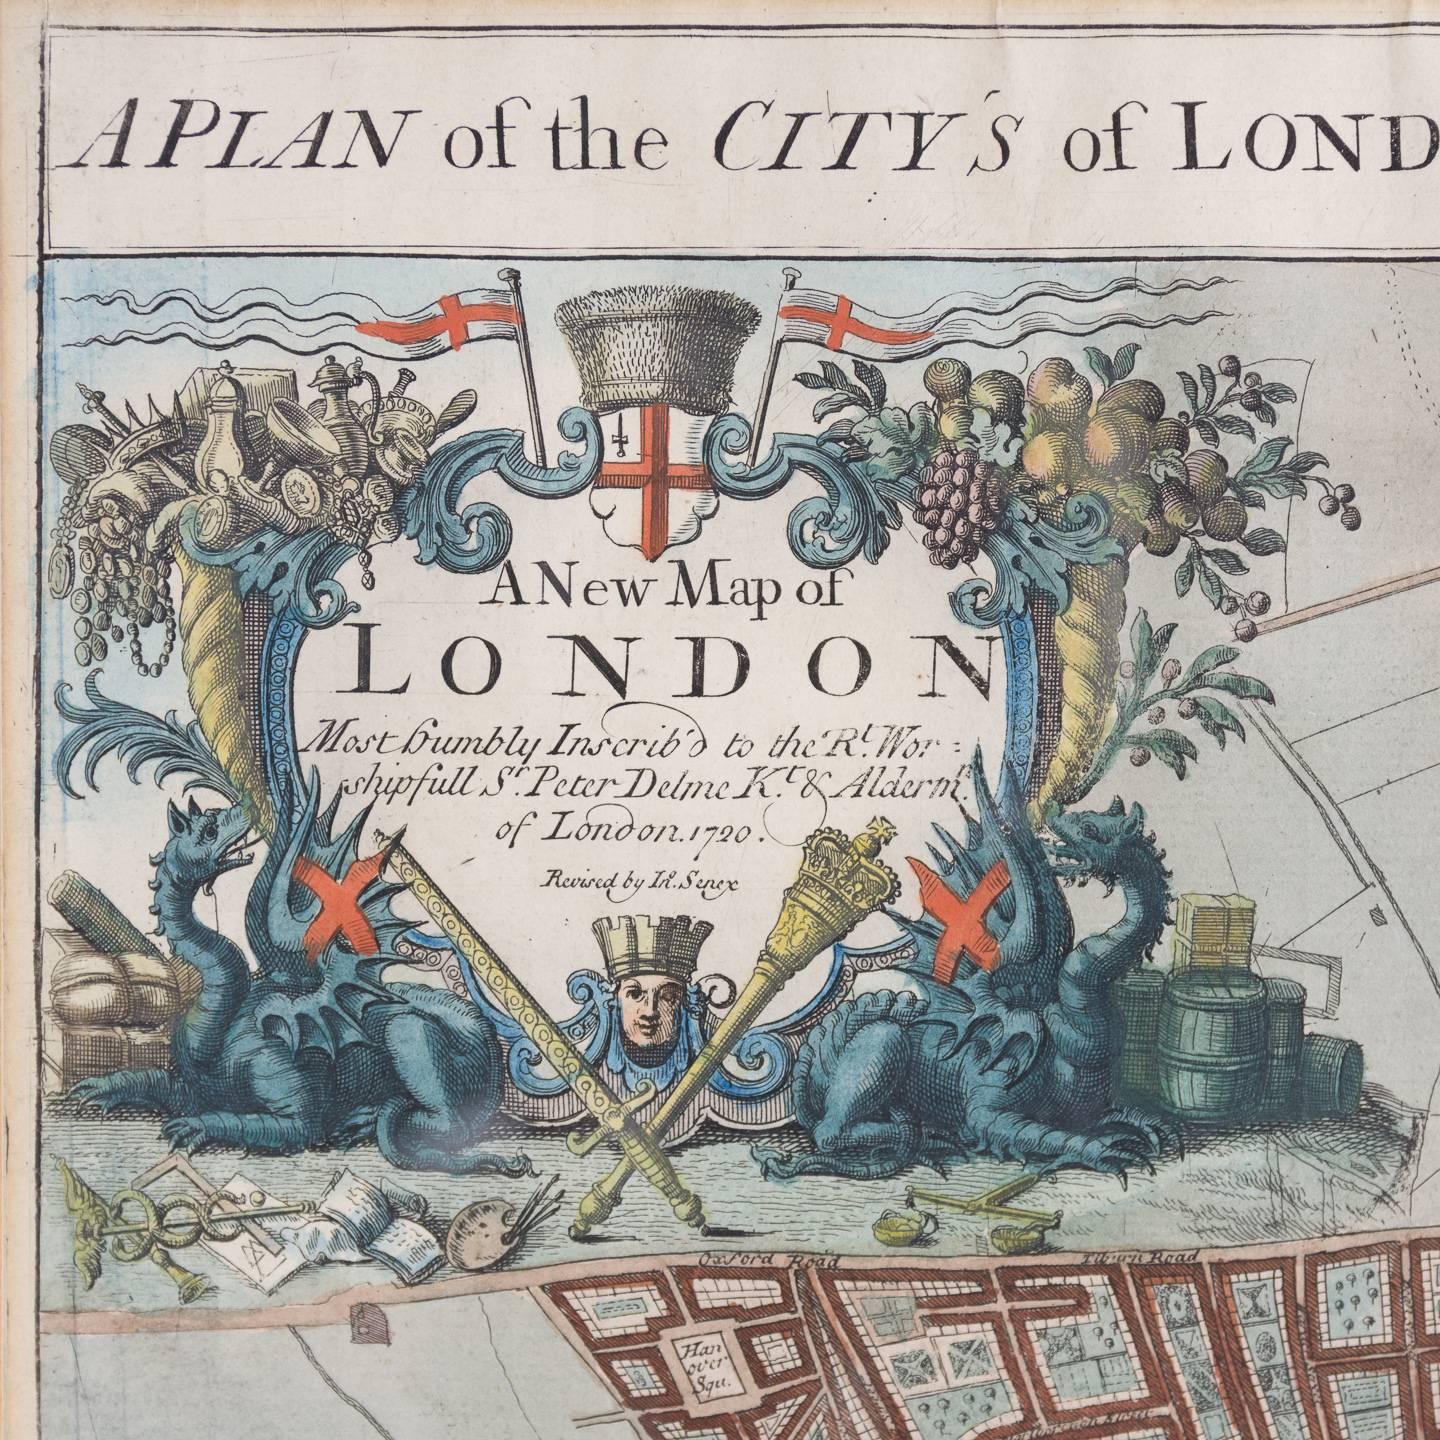 Plan of the City's of London, Westminster and Borough of Southwark, original antique map, published in 1720 by John Senex and engraved by Samuel Parker, hand coloured, with mount and gilded frame.

Showing London as it was built after the Great Fire